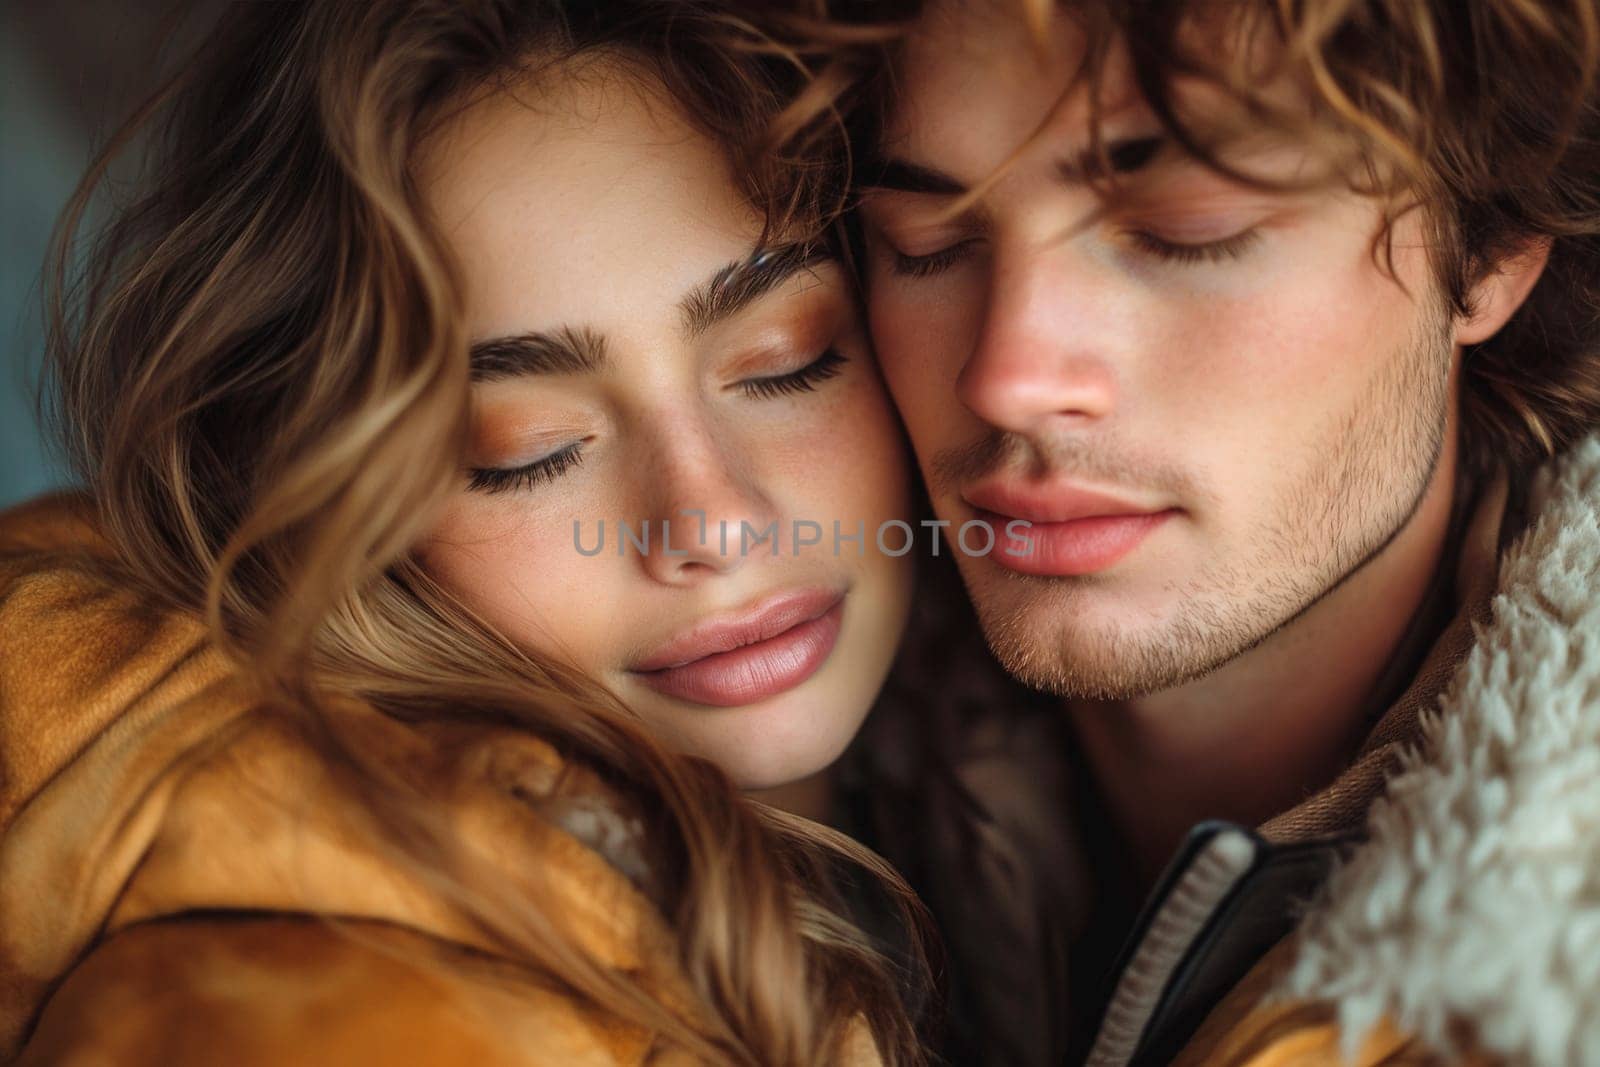 Affectionate couple with eyes closed embracing each other.